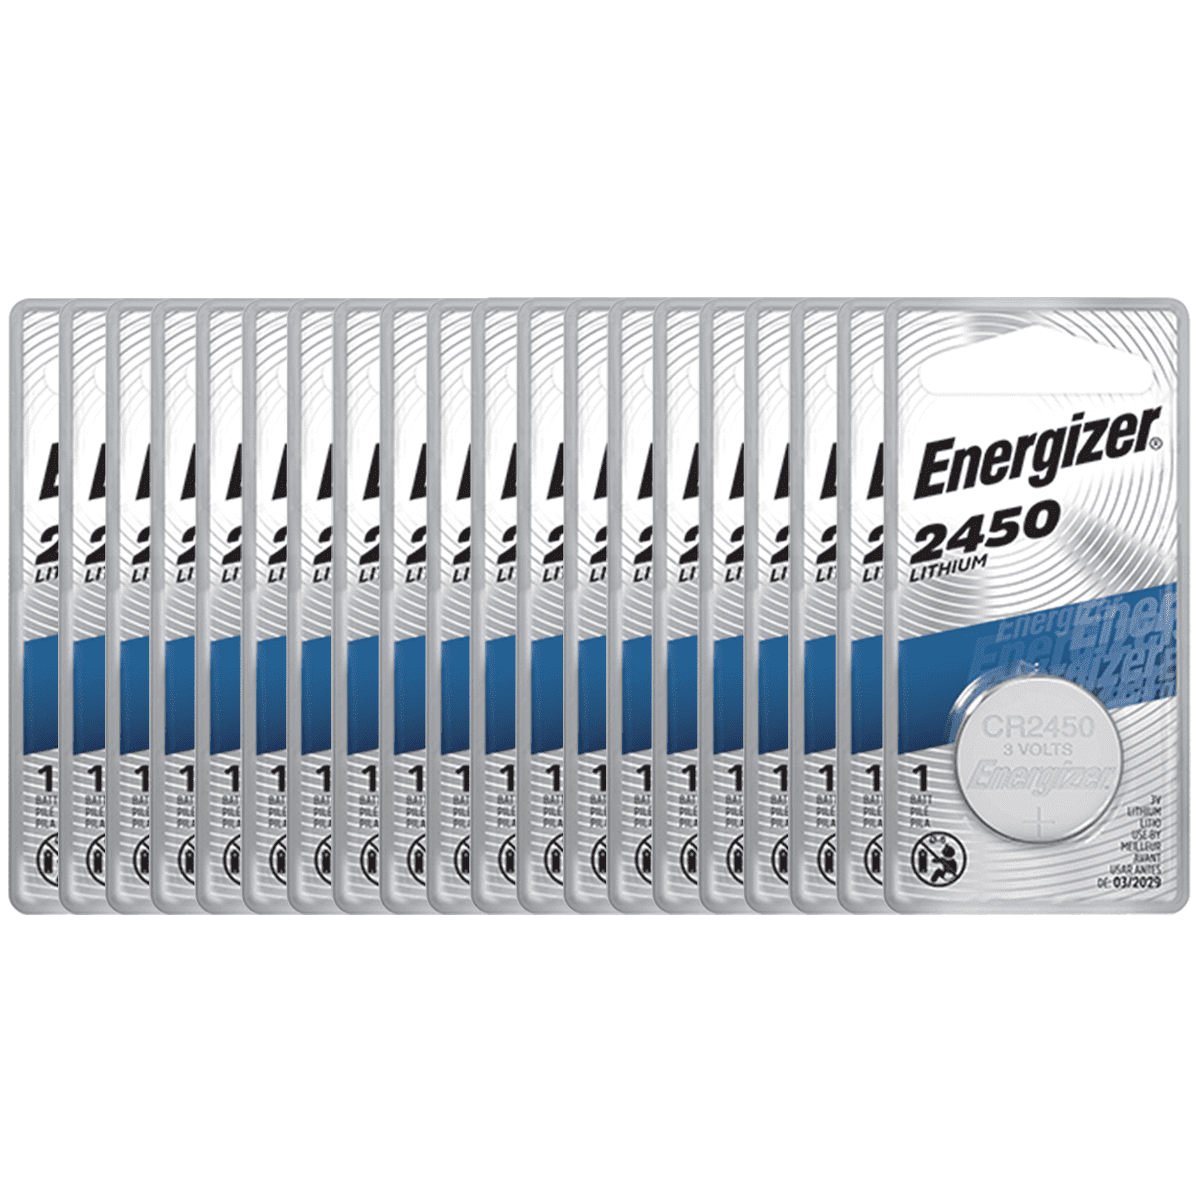 Energizer CR2450 3V Lithium Coin Cell Battery (20 Count) 